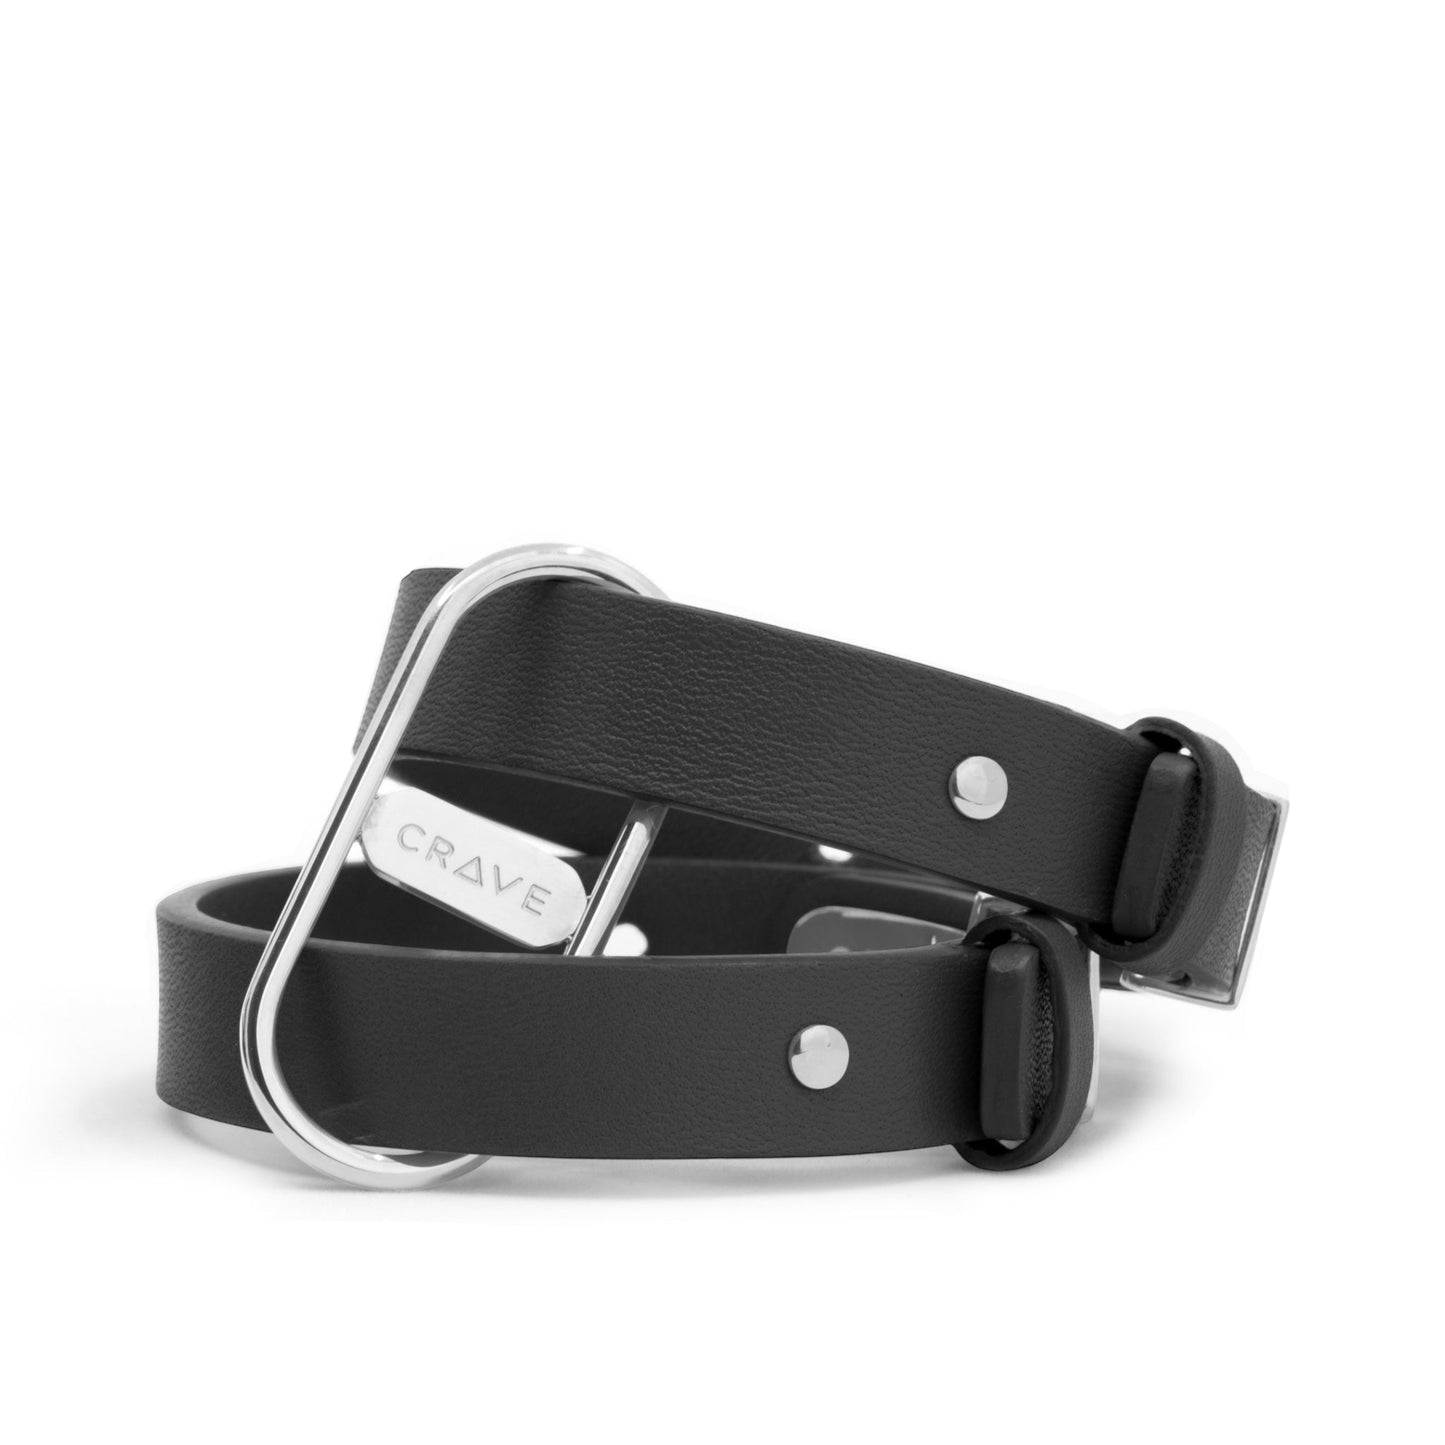 ICON Leather Cuff Black/Silver - Something about Sofia